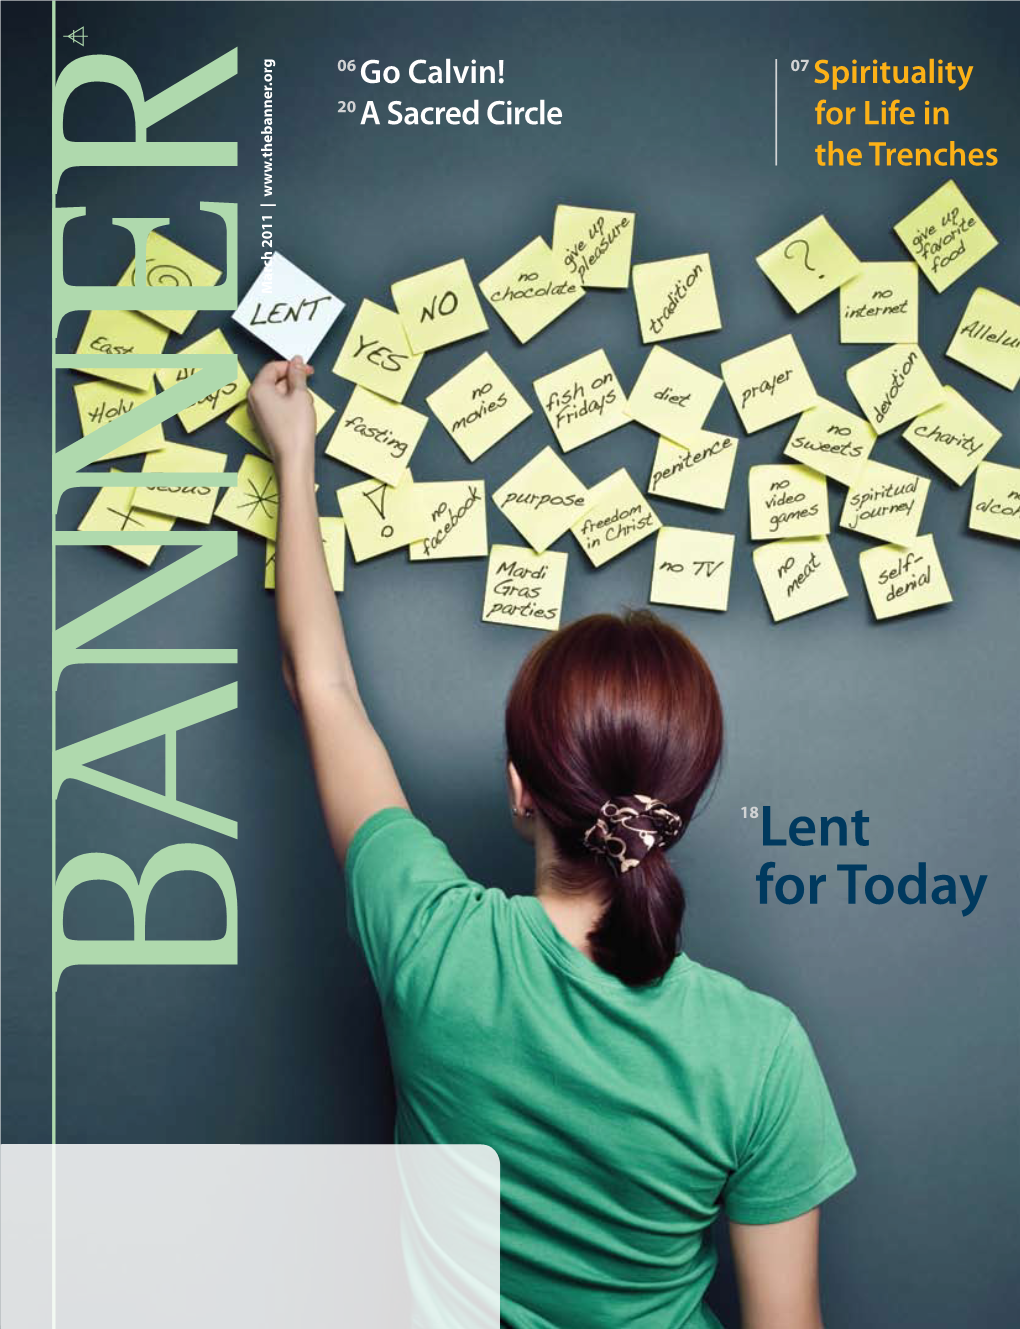 18Lent for Today